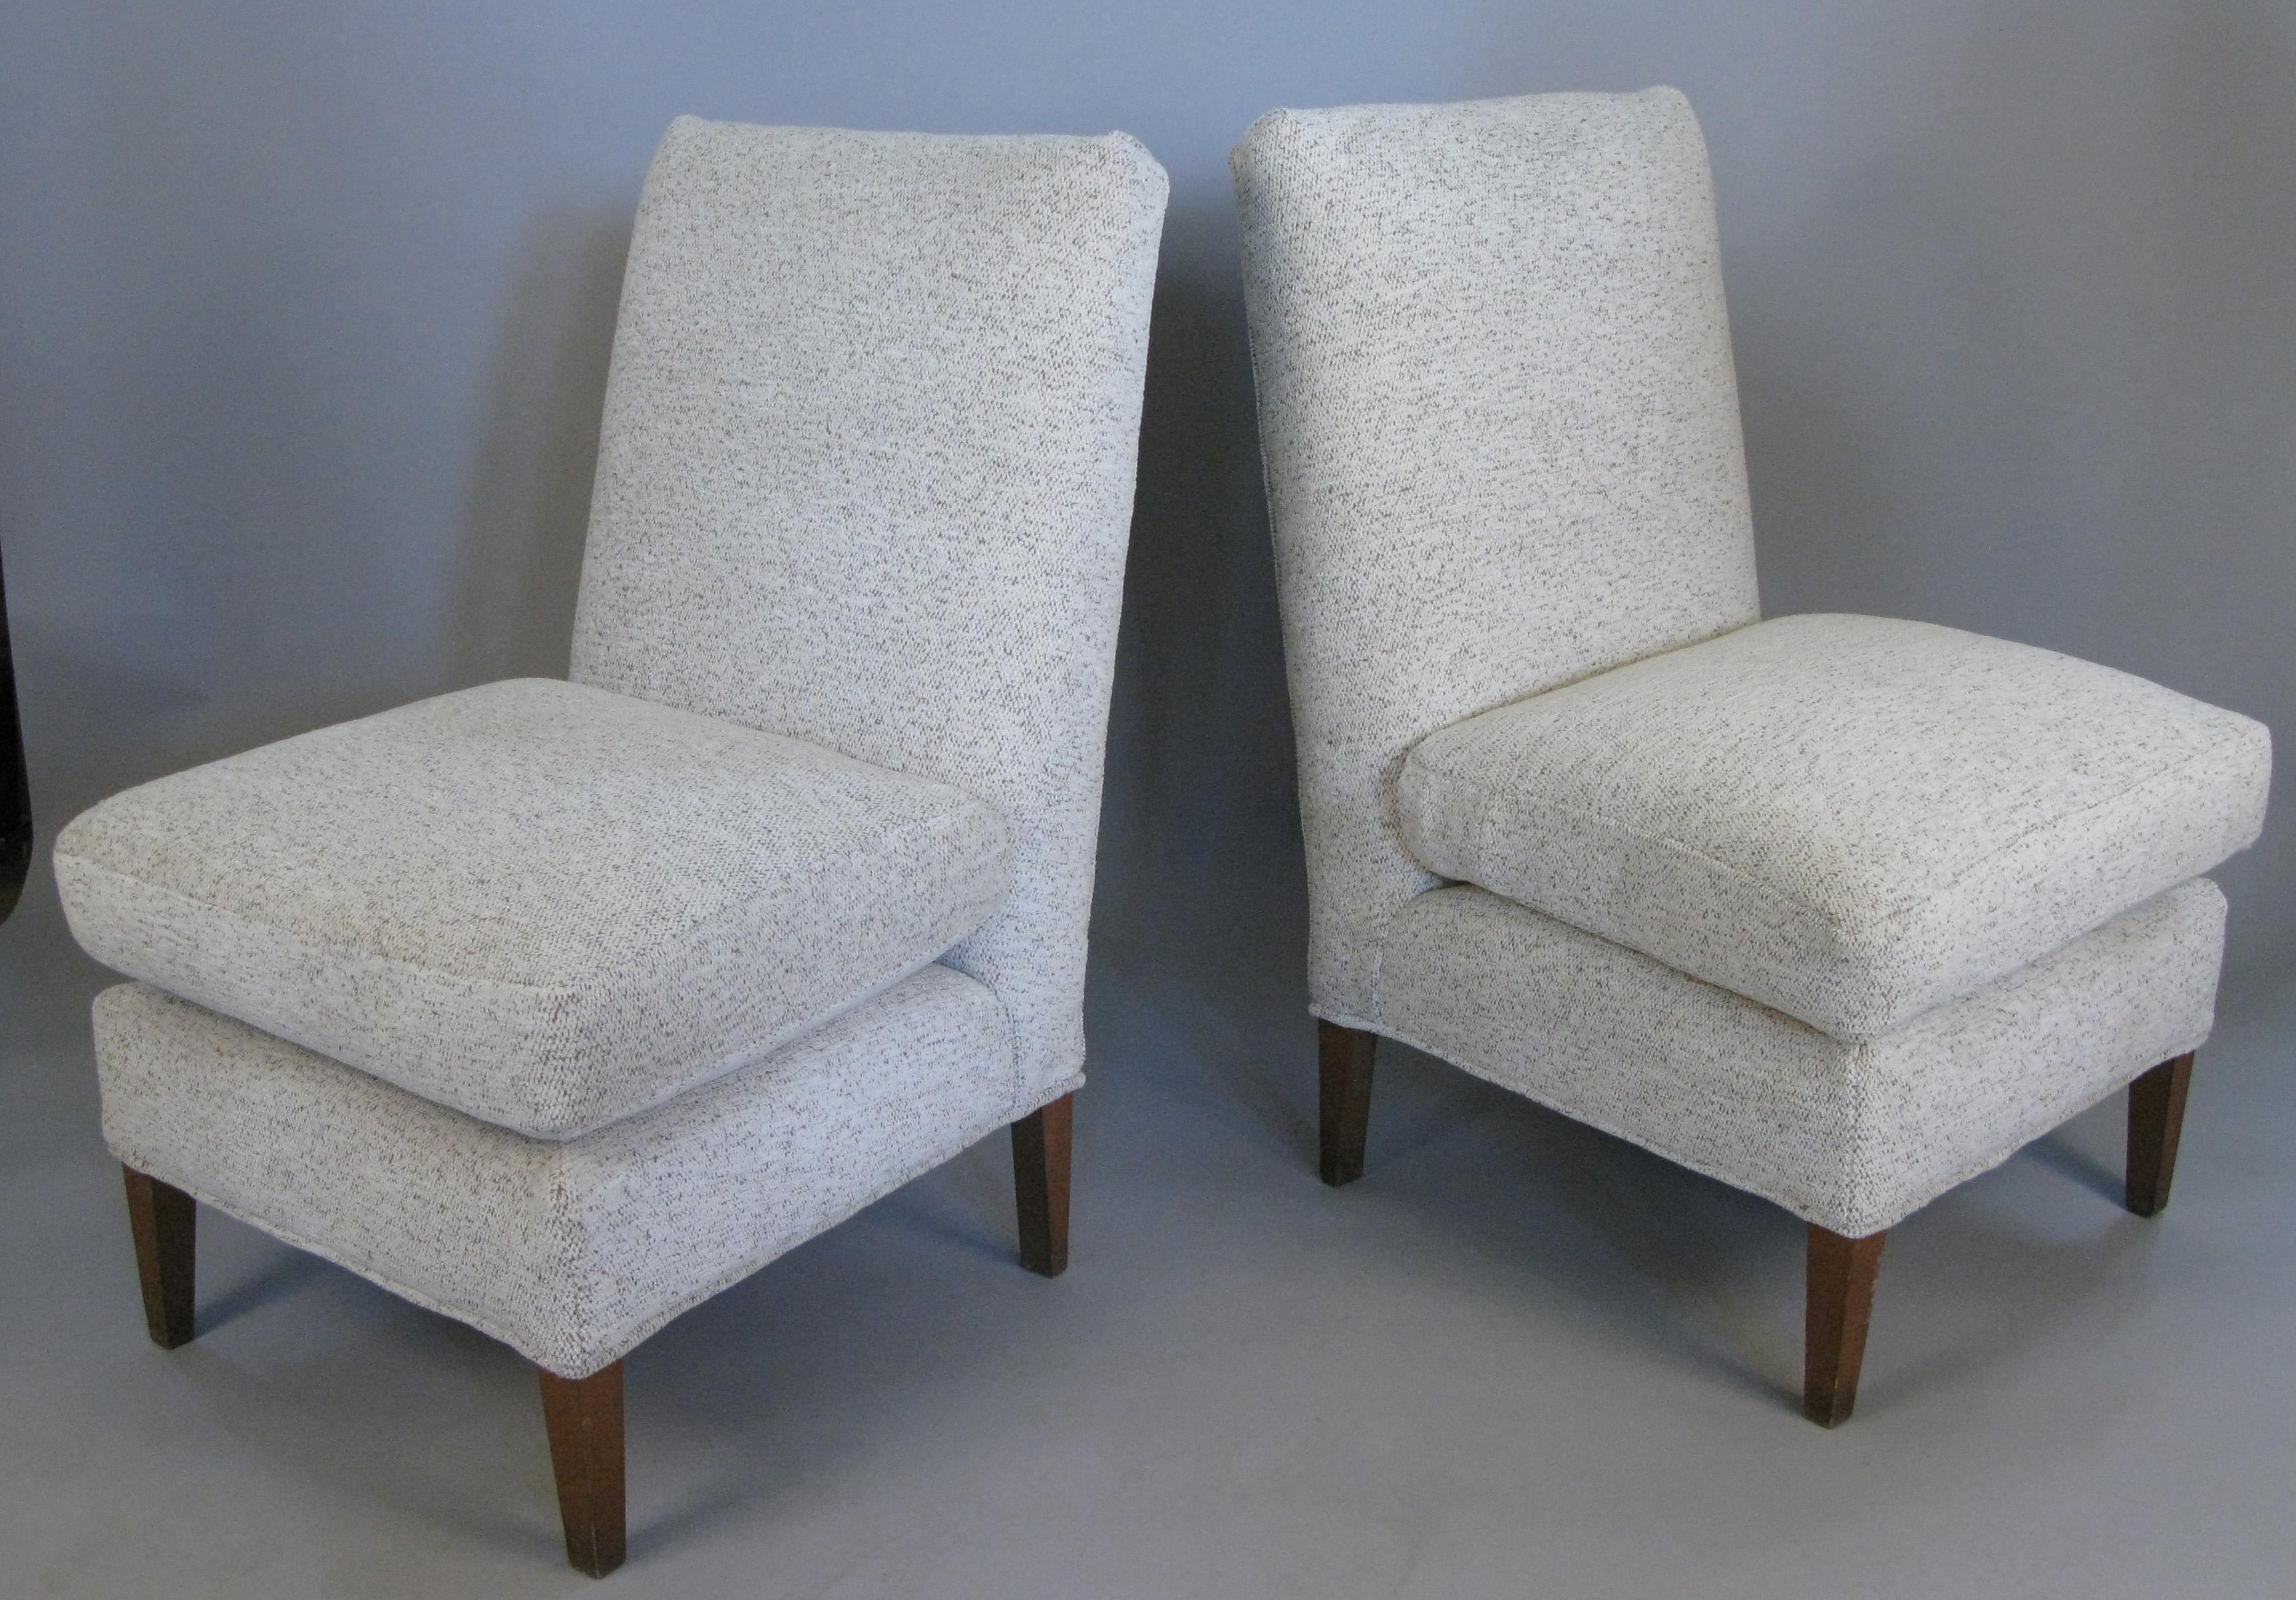 A charming pair of vintage 1960s armless slipper lounge chairs, with high backs and down-wrapped foam seat cushions. These have been reupholstered with a light oatmeal colored thick pile soft upholstery fabric.